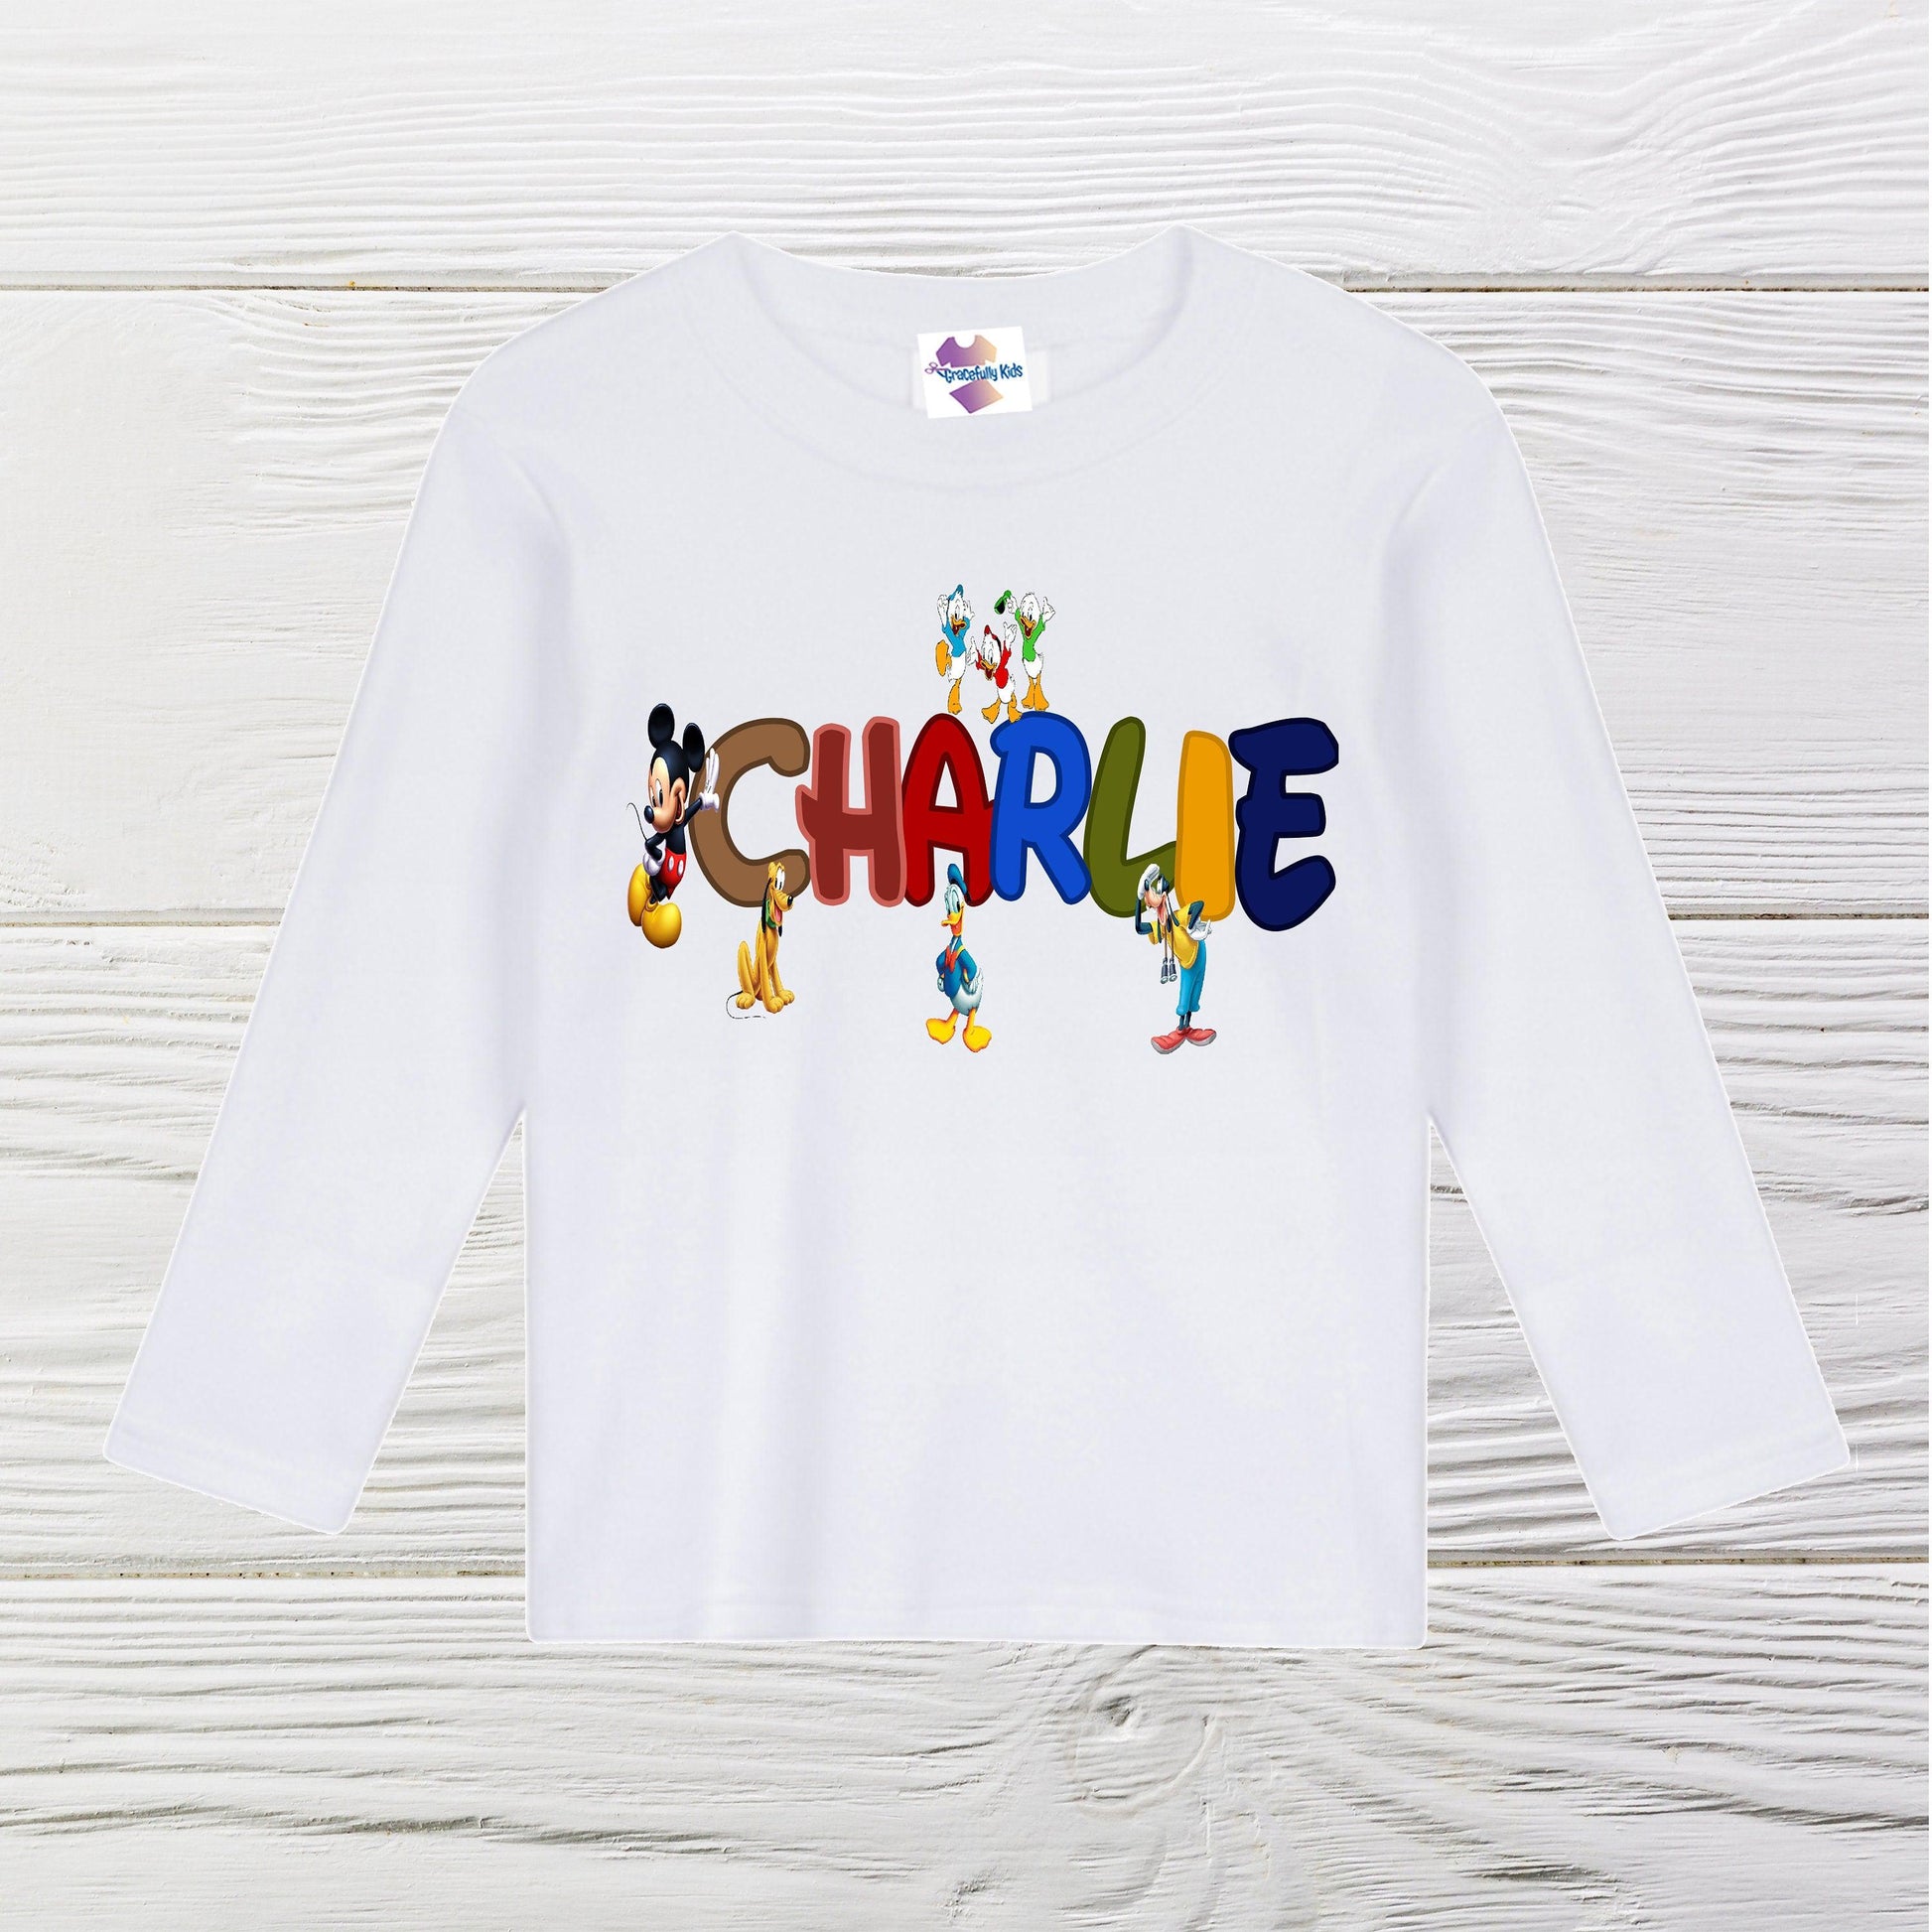 Mickey and friends shirt